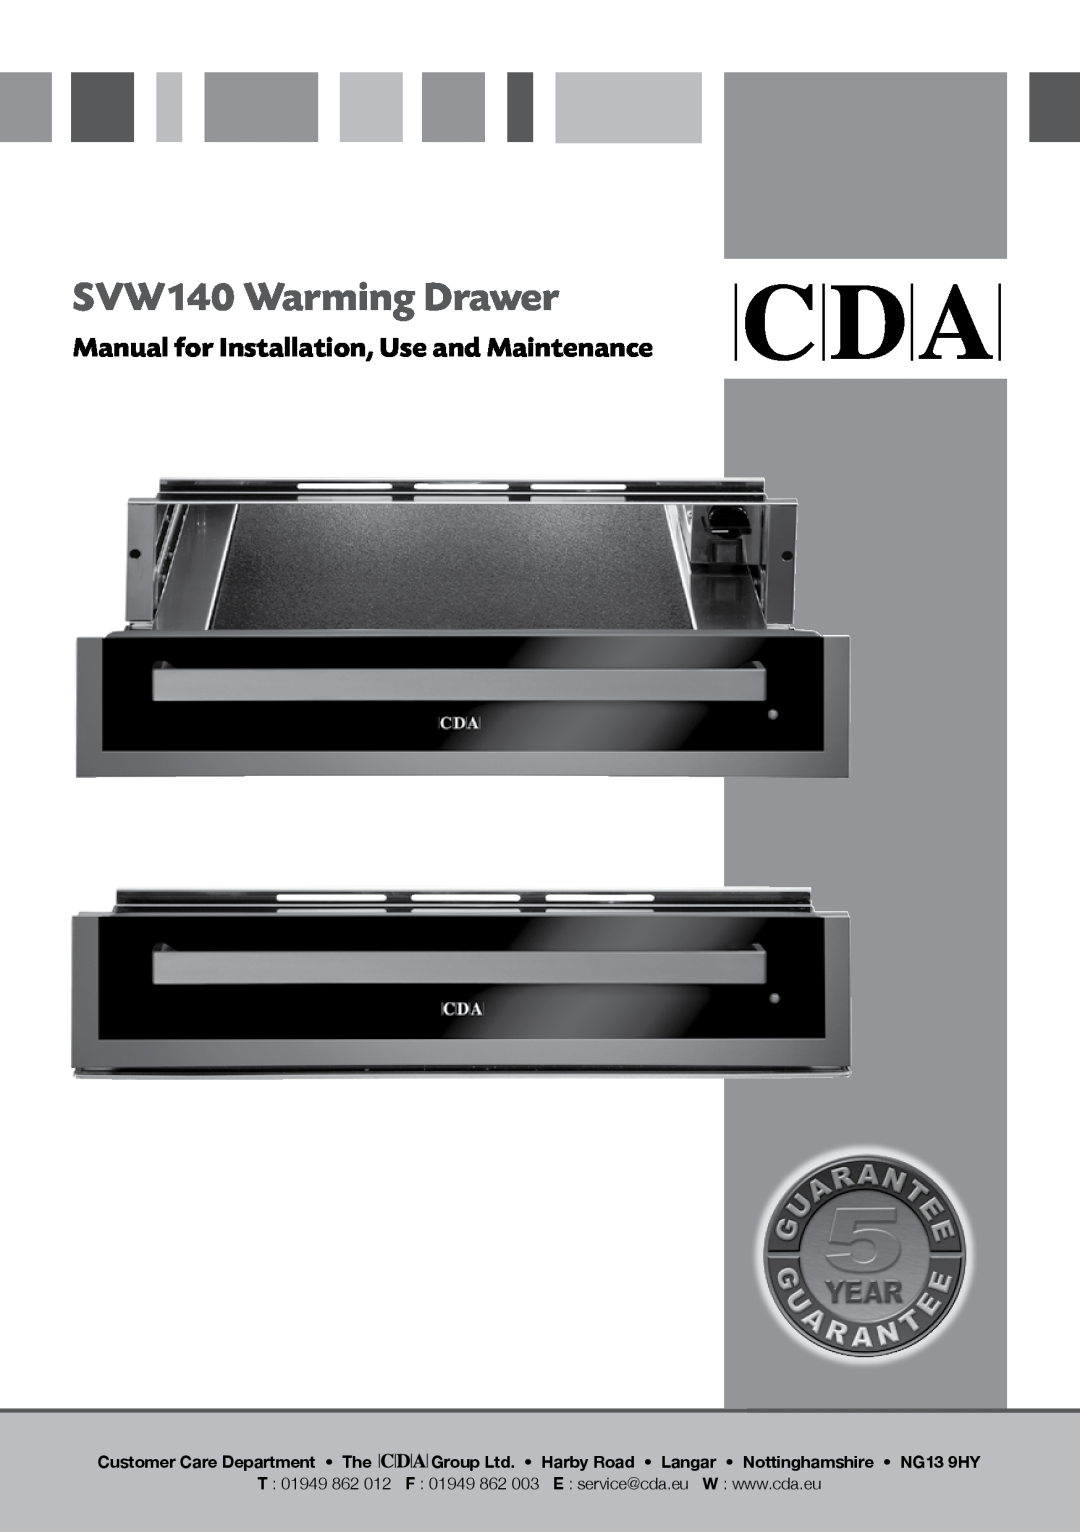 CDA manual SVW140 Warming Drawer, Manual for Installation, Use and Maintenance 